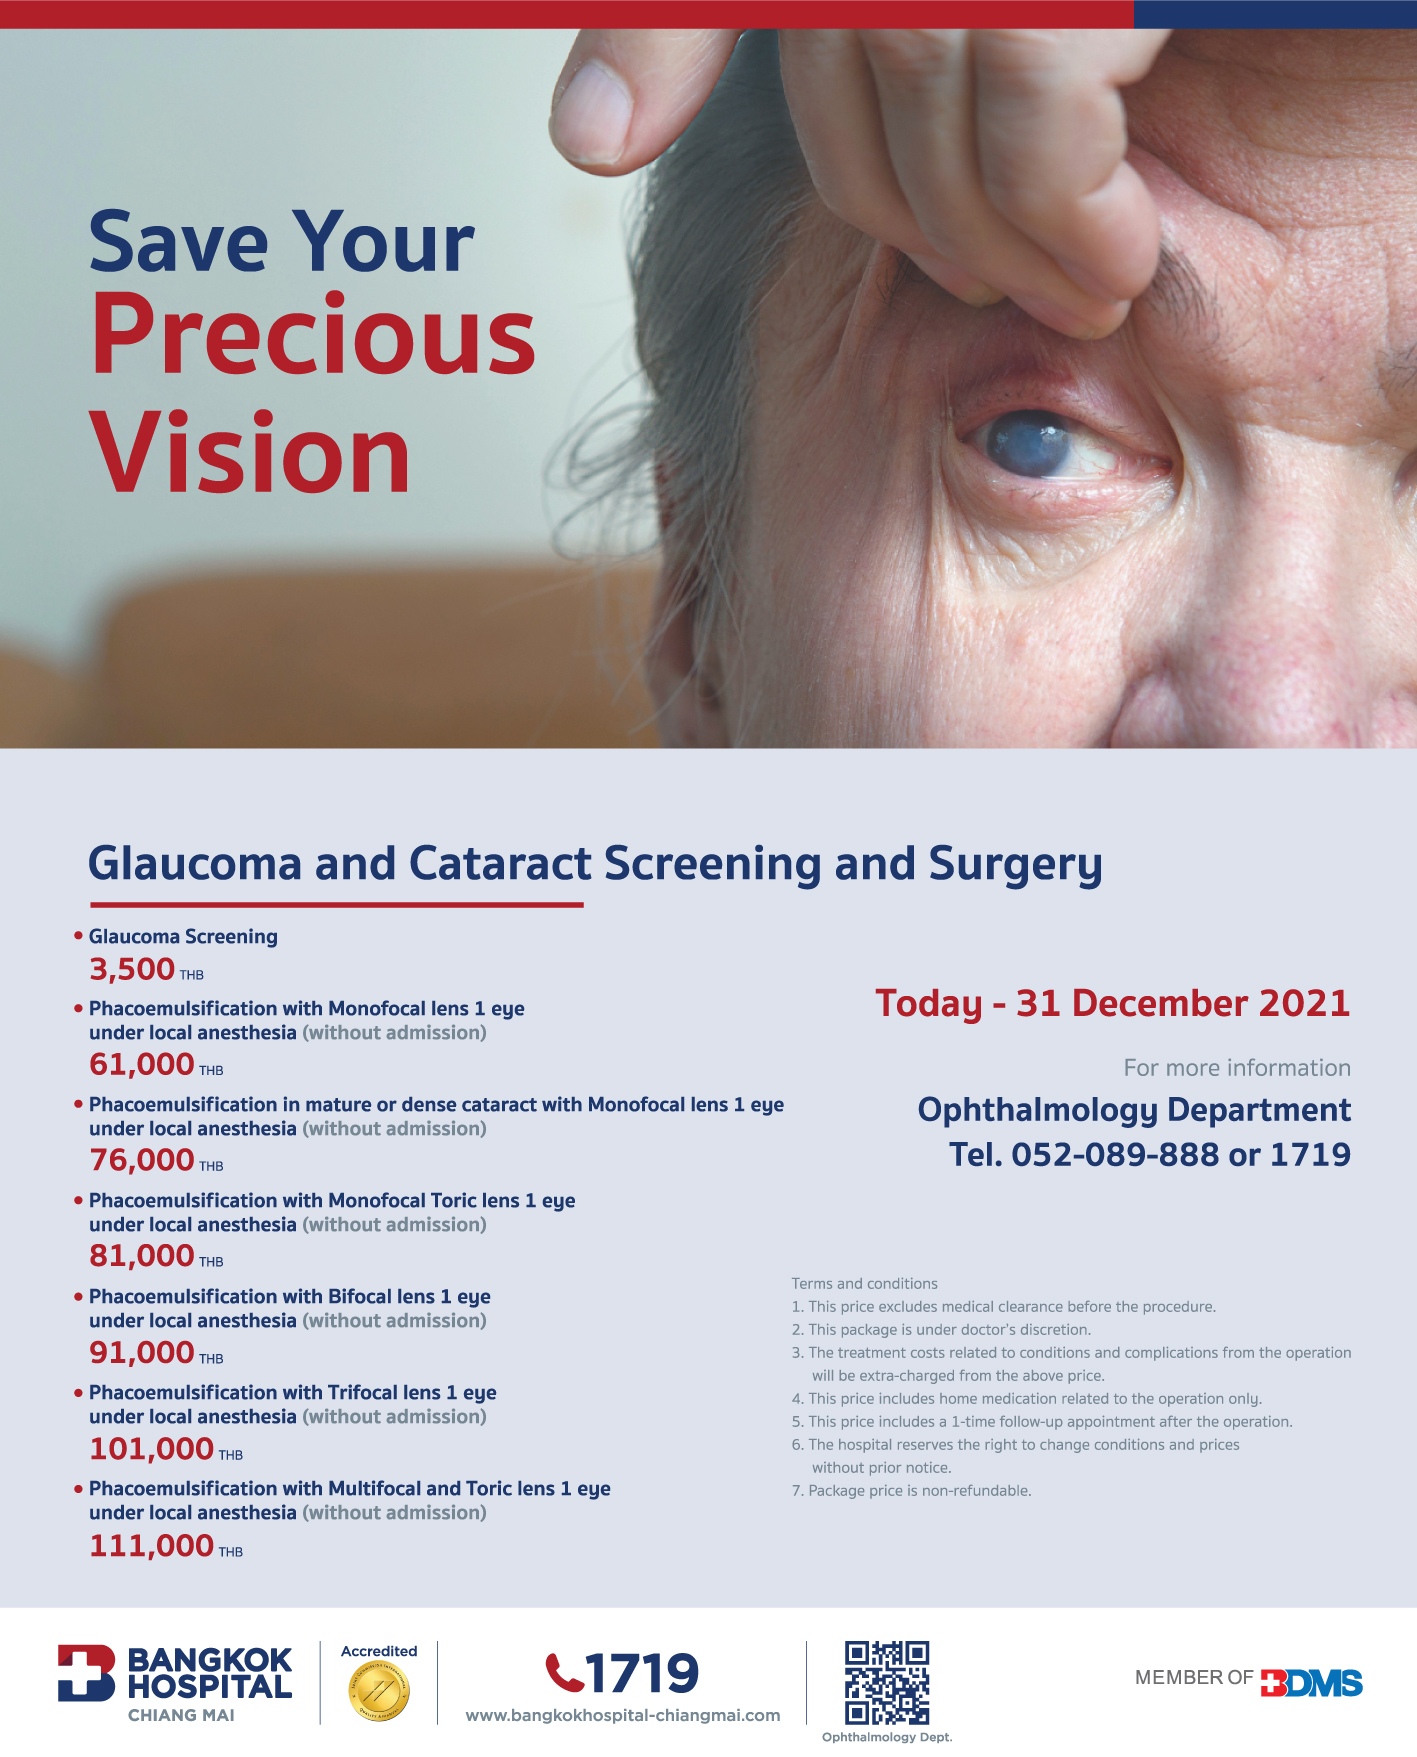 glaucoma-and-cataract-screening-and-surgery-en